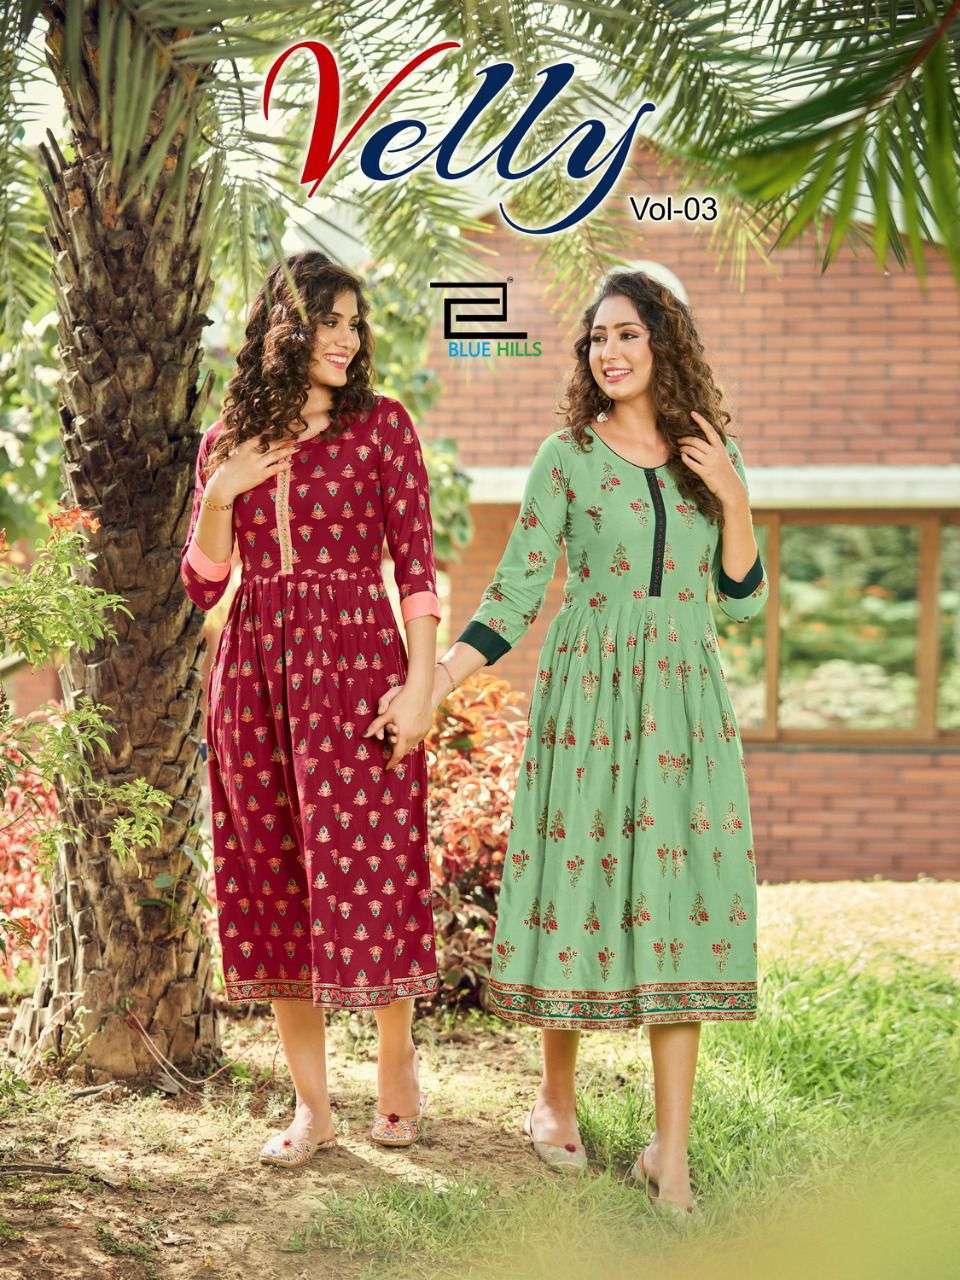 Blue Hills Velly Vol 3 Rayon With handwork Kurti collection